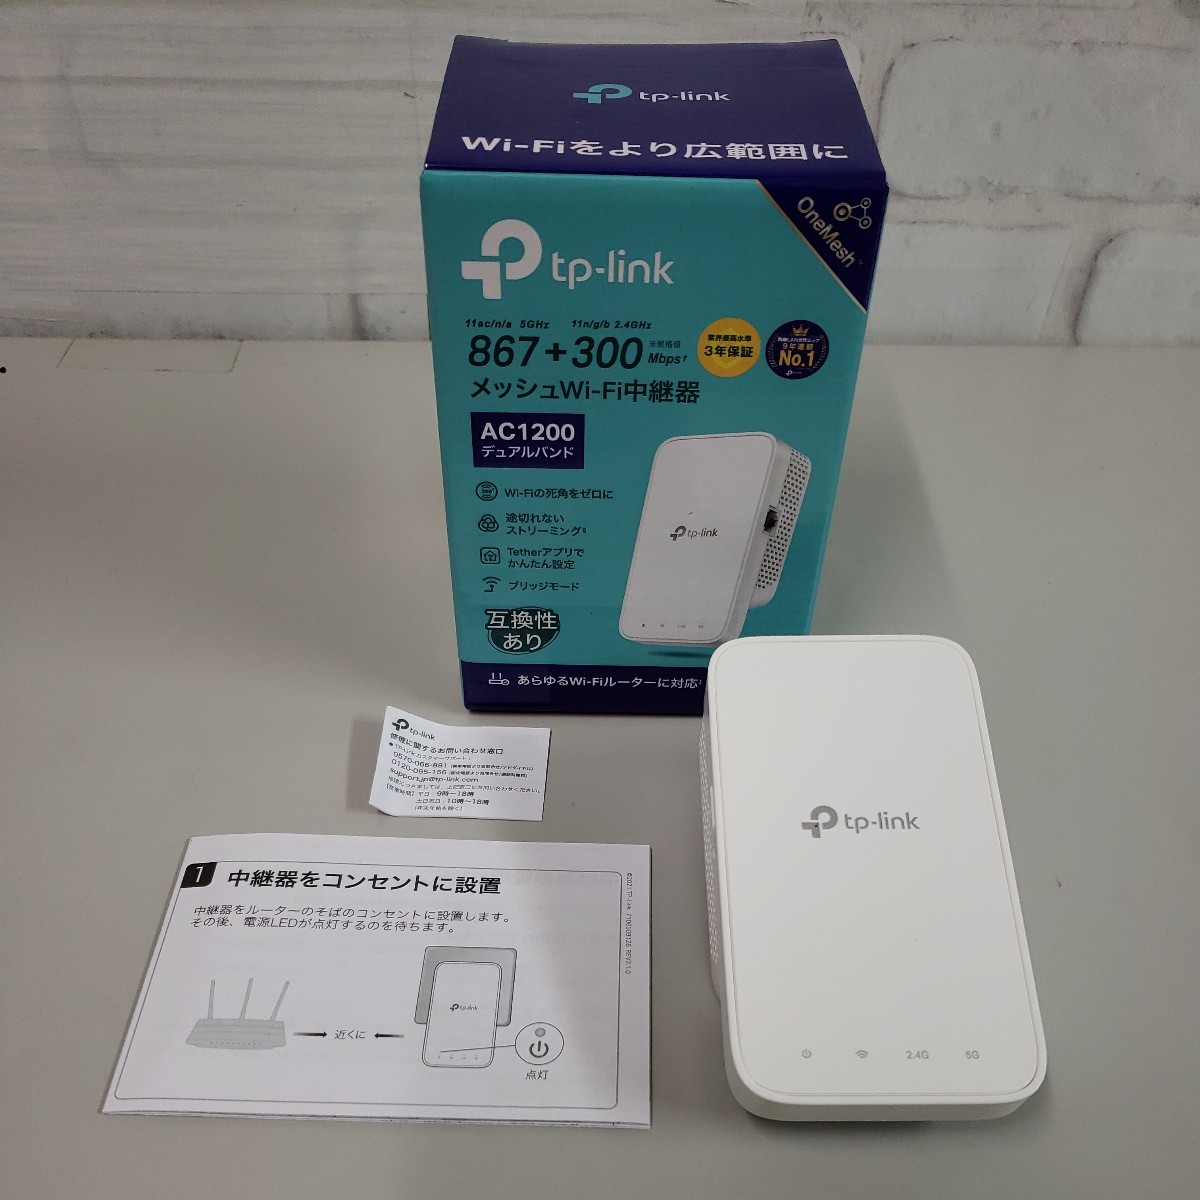 602y0710*TP-Link WiFi wireless LAN relay machine Wi-Fi 5 11ac AC1200 866+300Mbps Wi-Fi relay machine compact outlet RE330